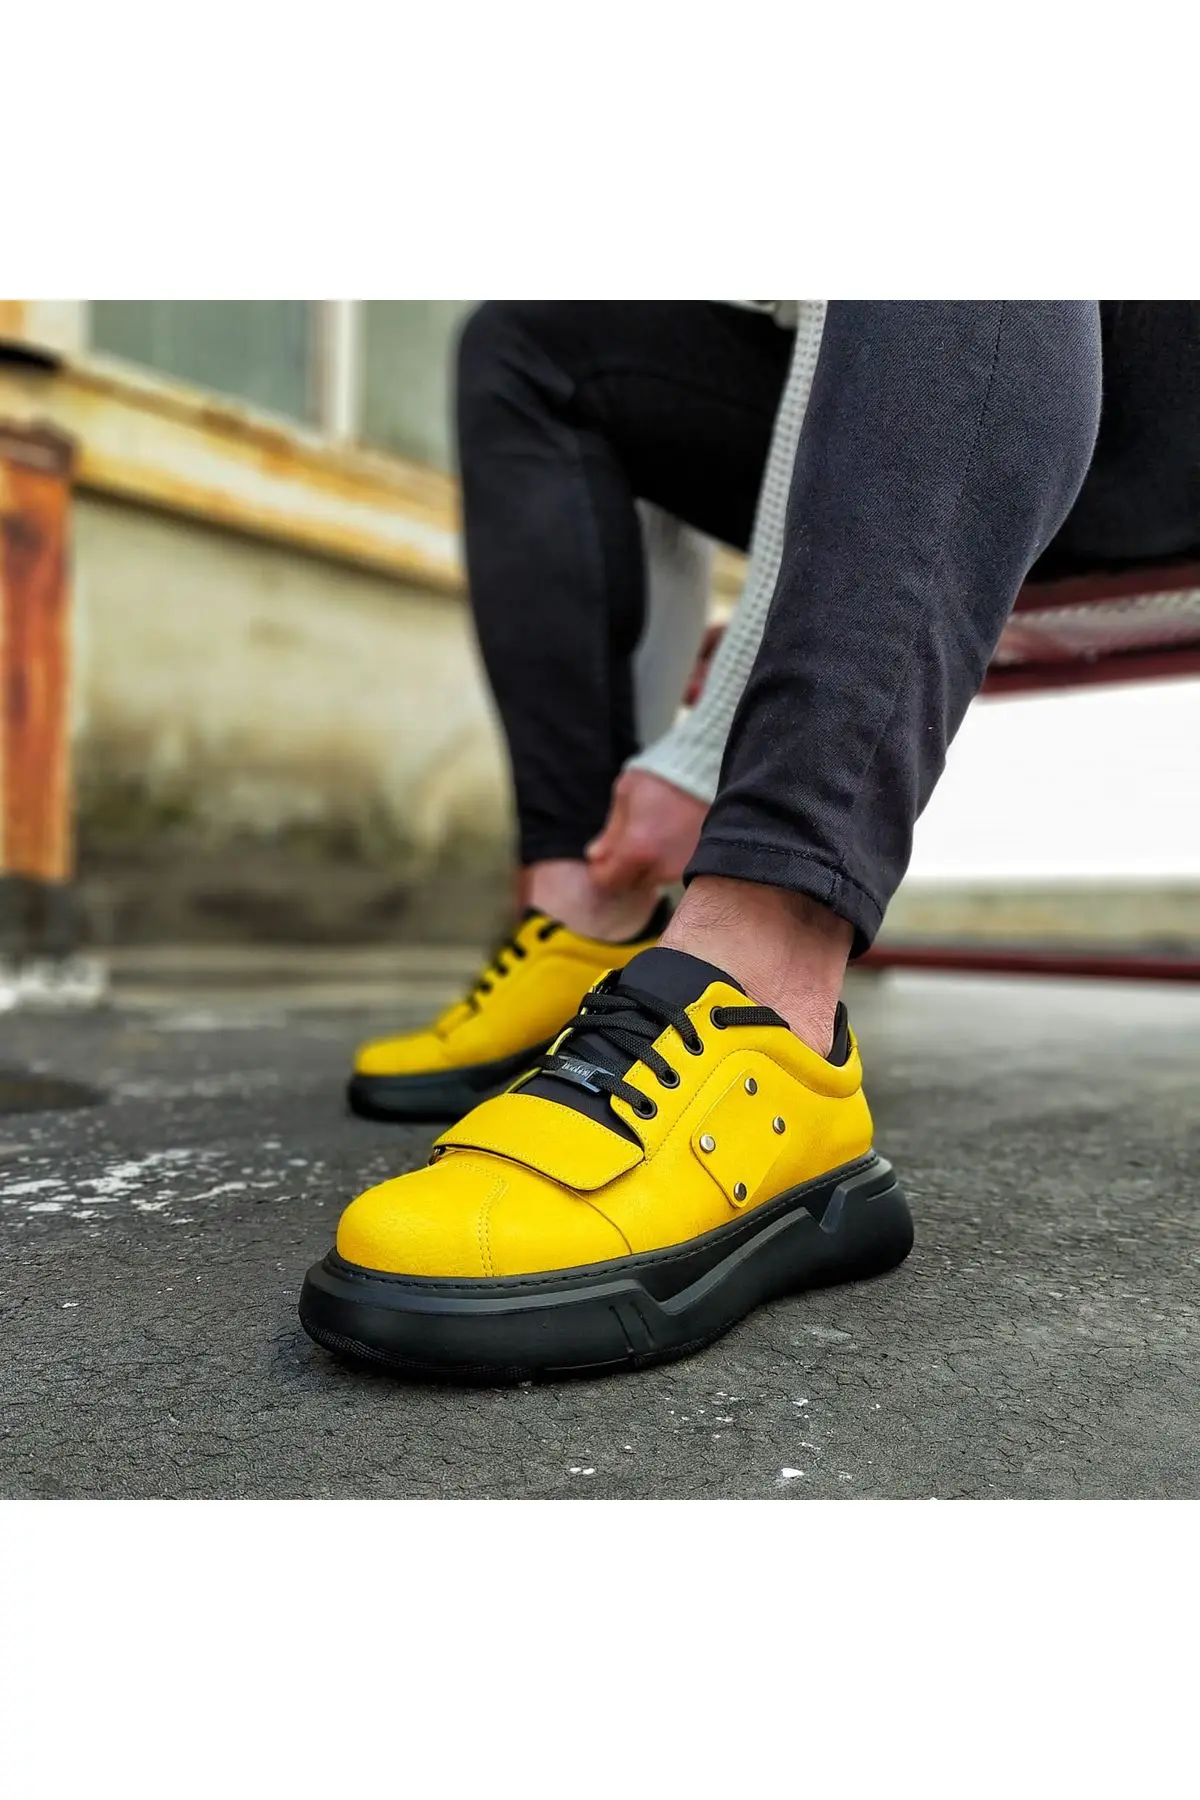 

BOA Male Shoes Yellow Casual High Charcoal Insole Laced New Generation Original Design Brand Model Young Trend Style Quality WG018